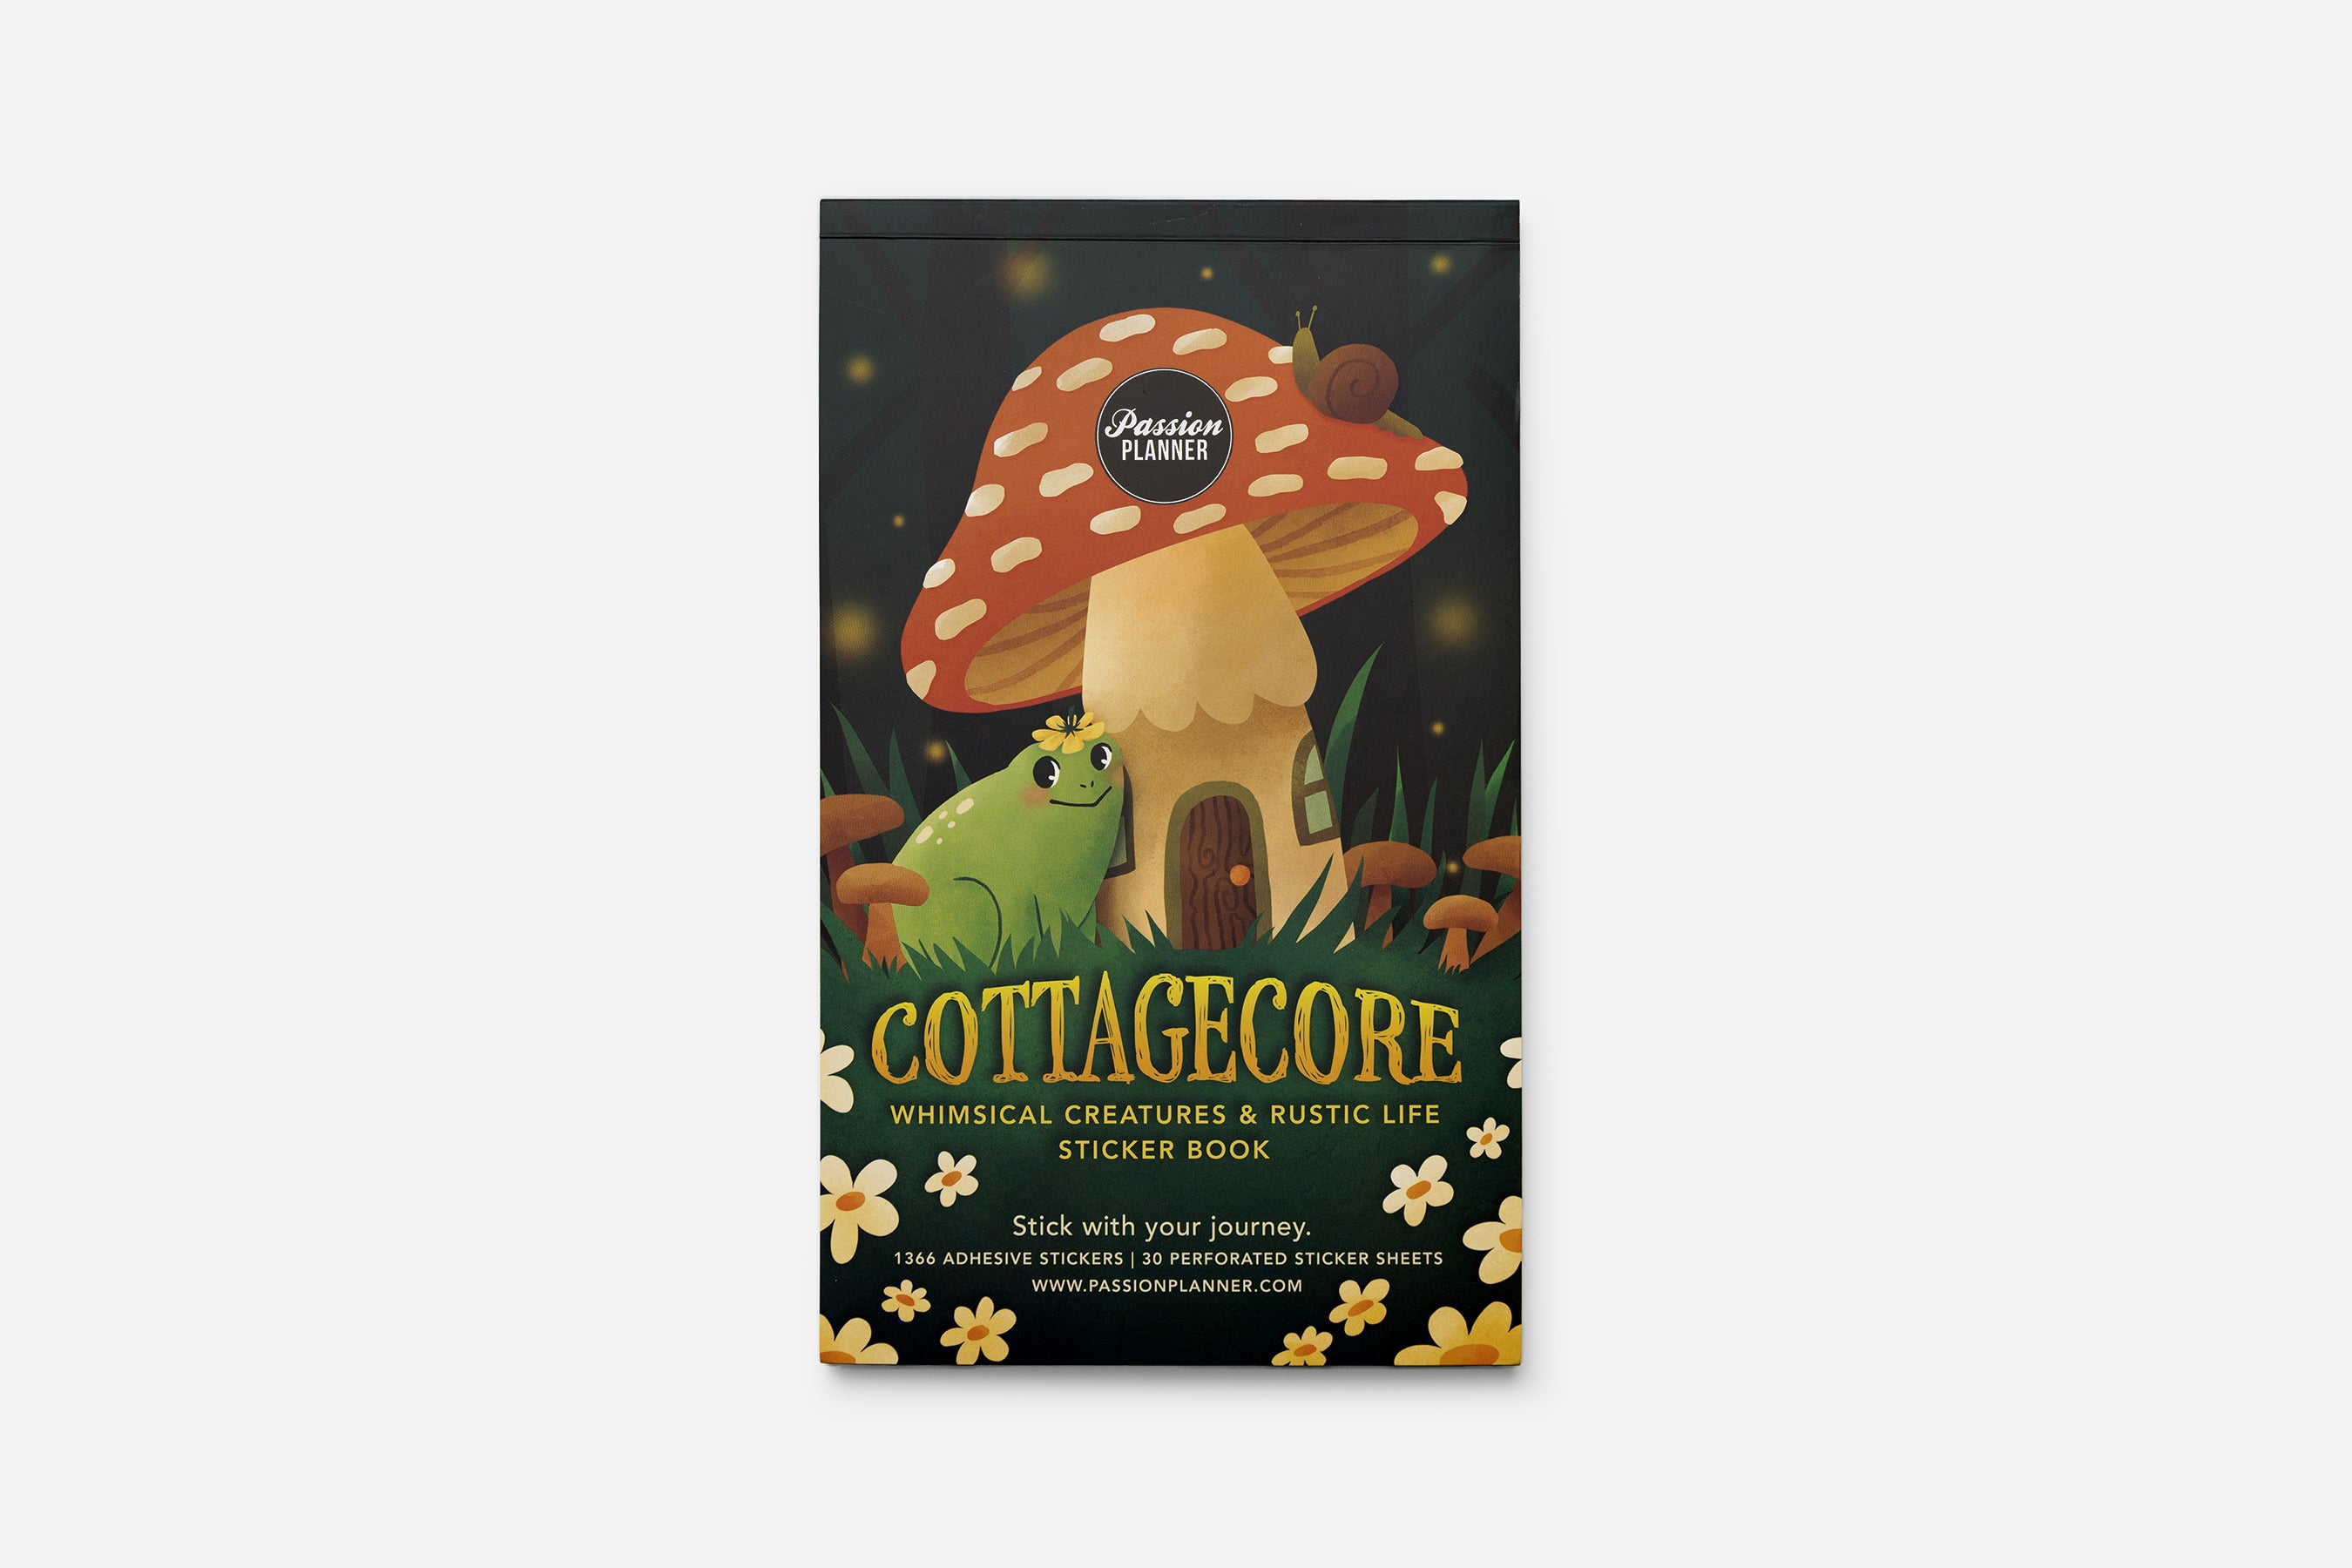 Cottagecore - Whimsical Creatures & Rustic Life Sticker Book